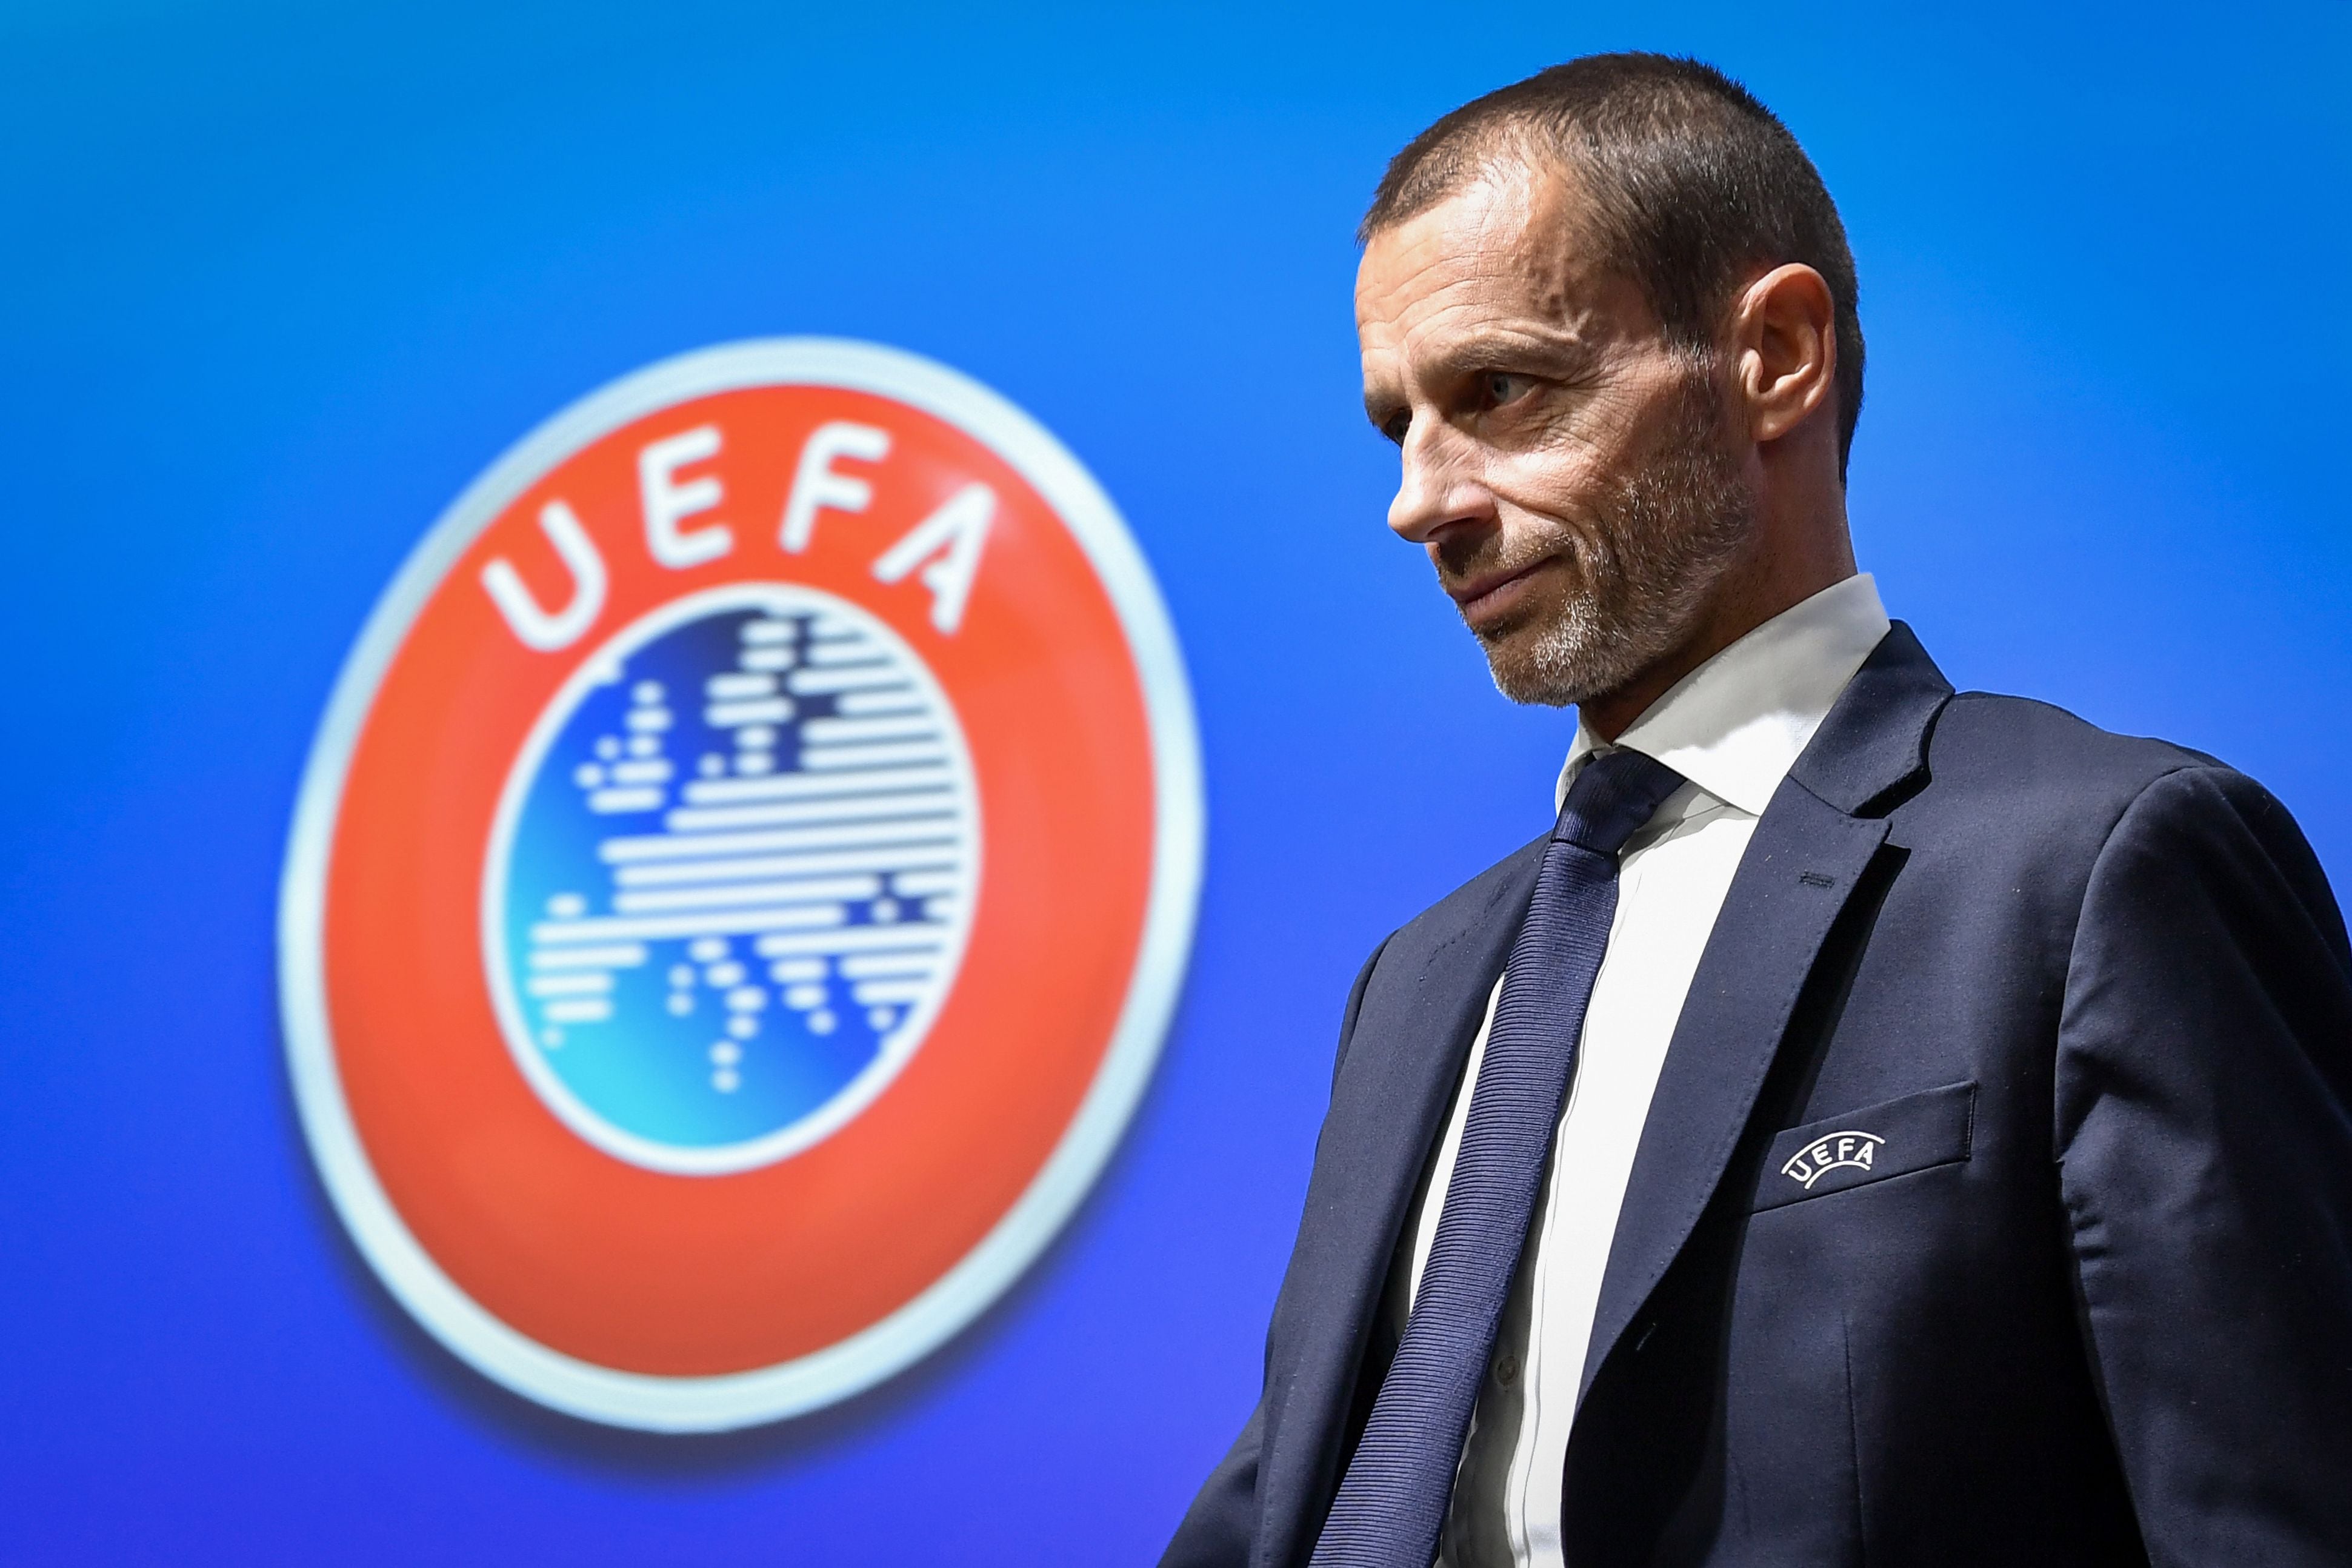 Uefa president Aleksander Ceferin will lead a meeting on Tuesday to decide the next direction of European football